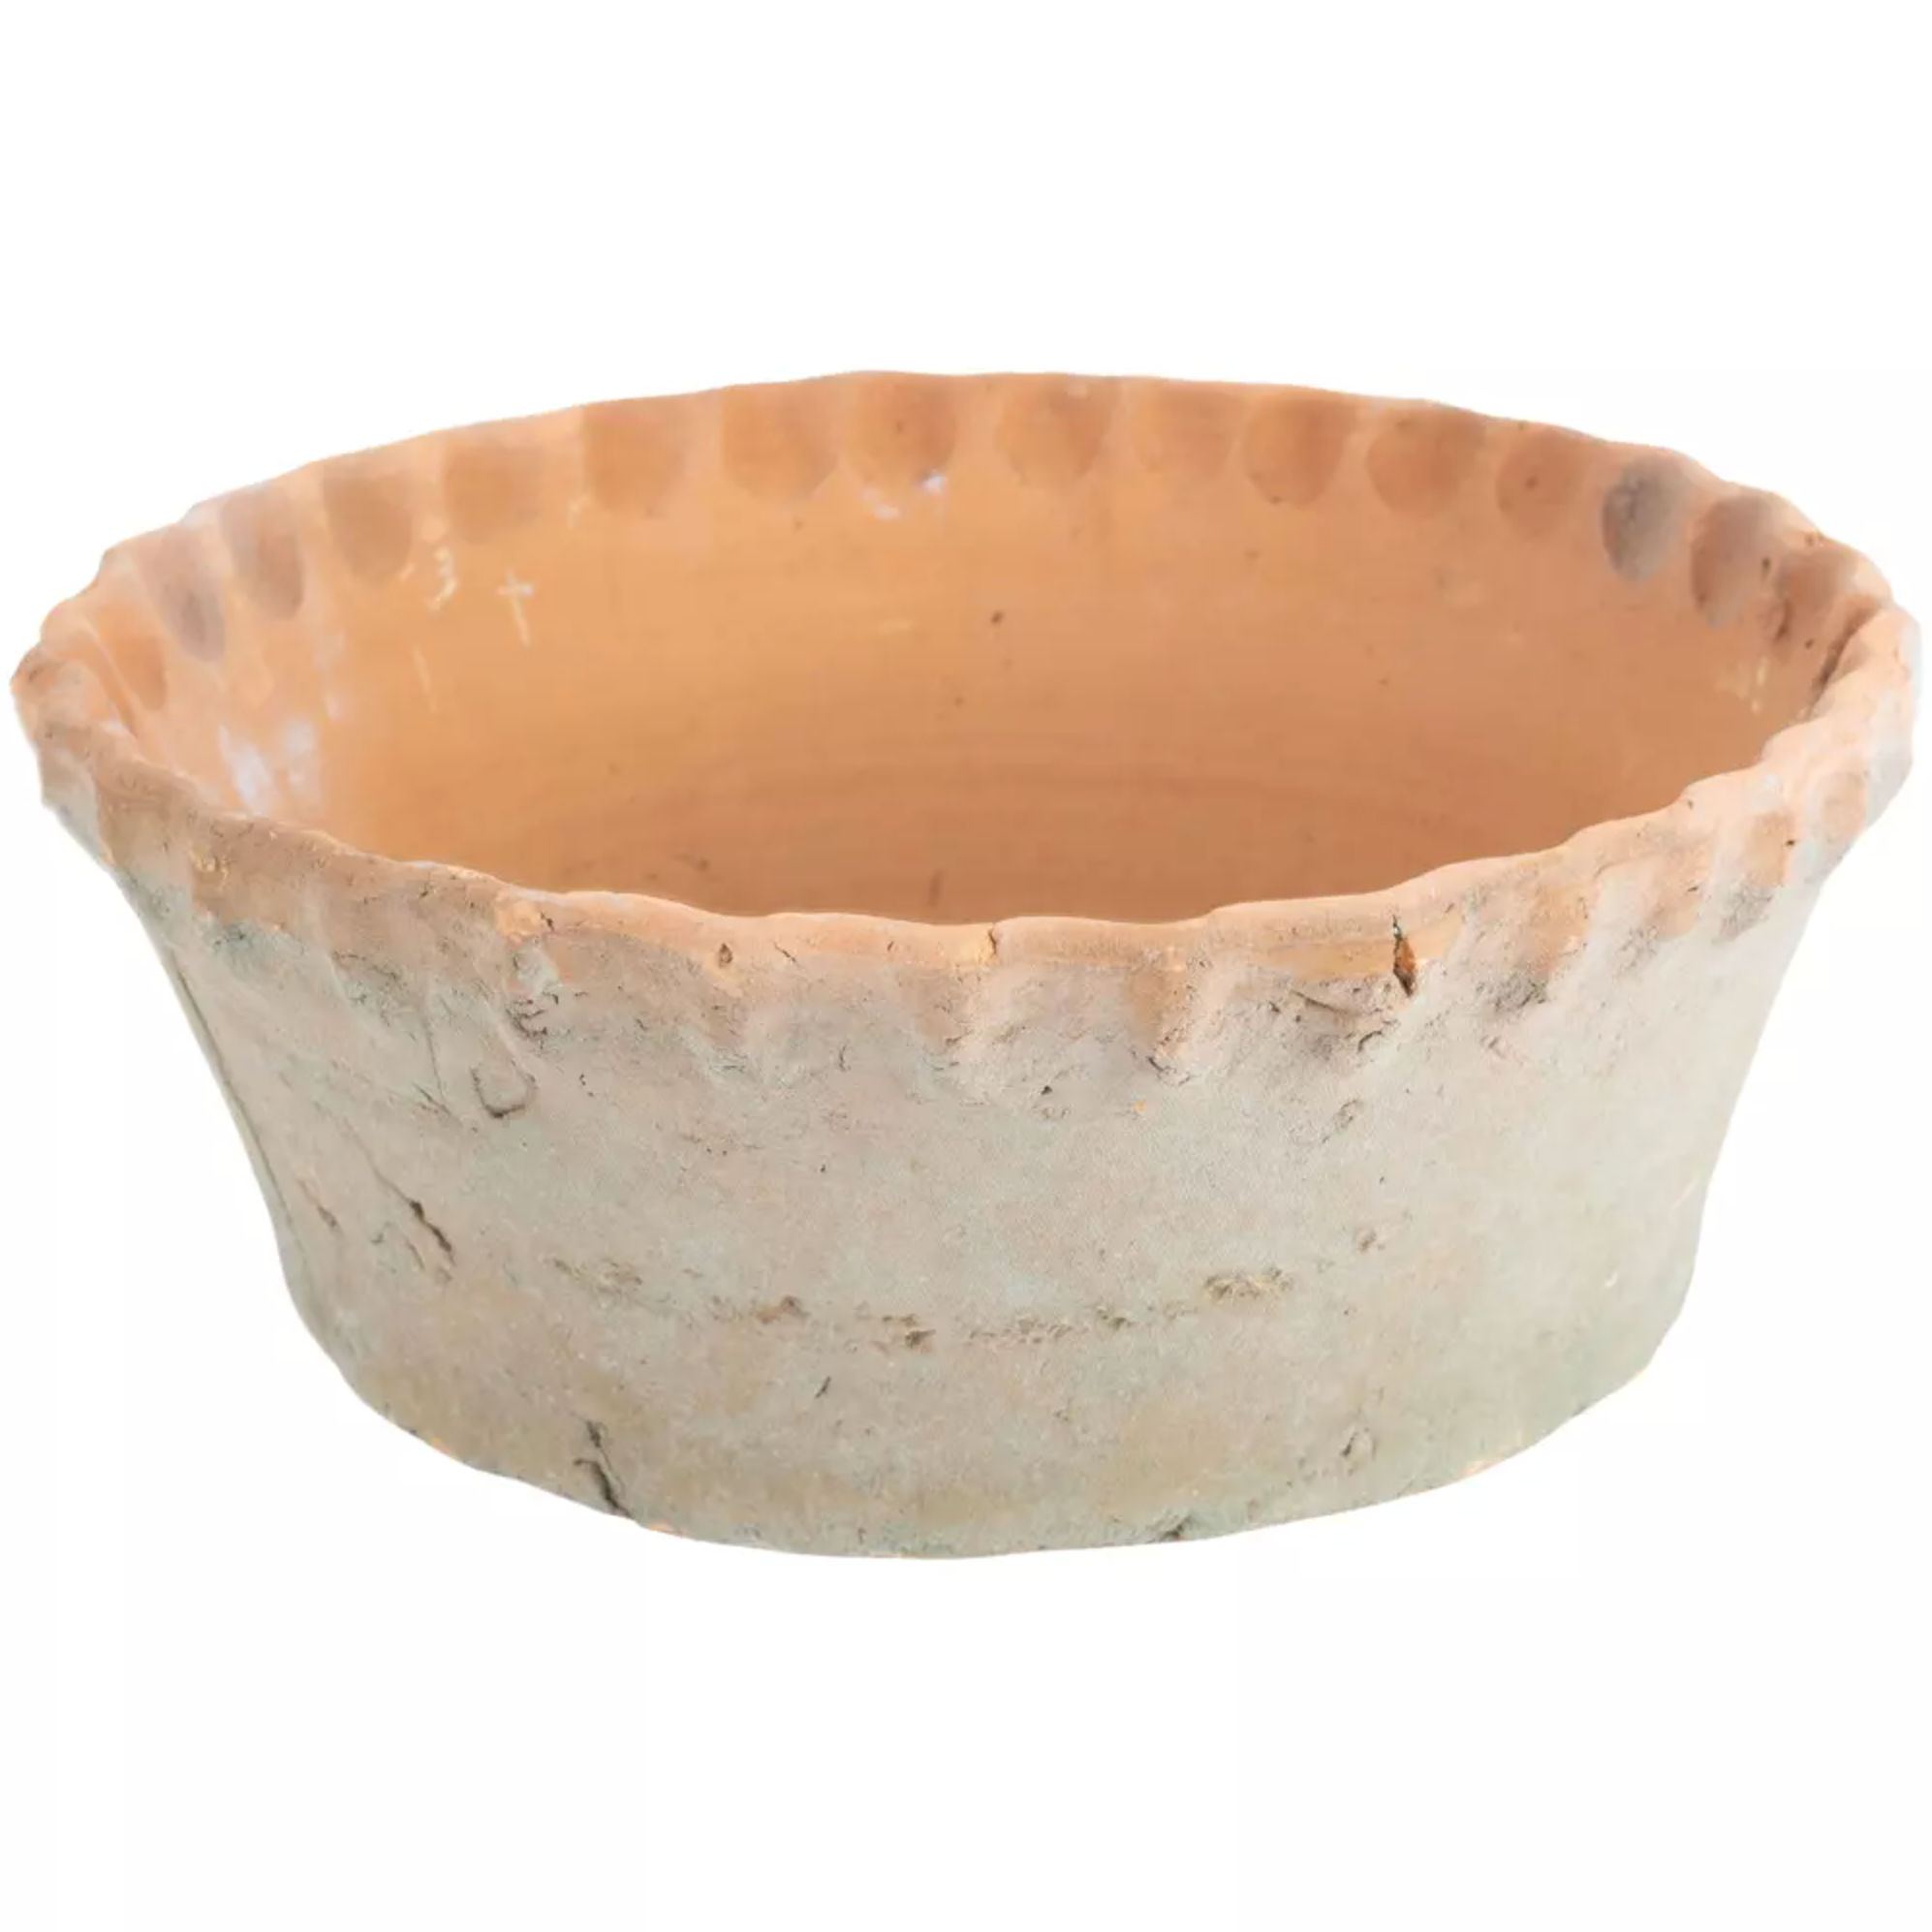 Large Terracotta Planter with a Pie Crust Rim 